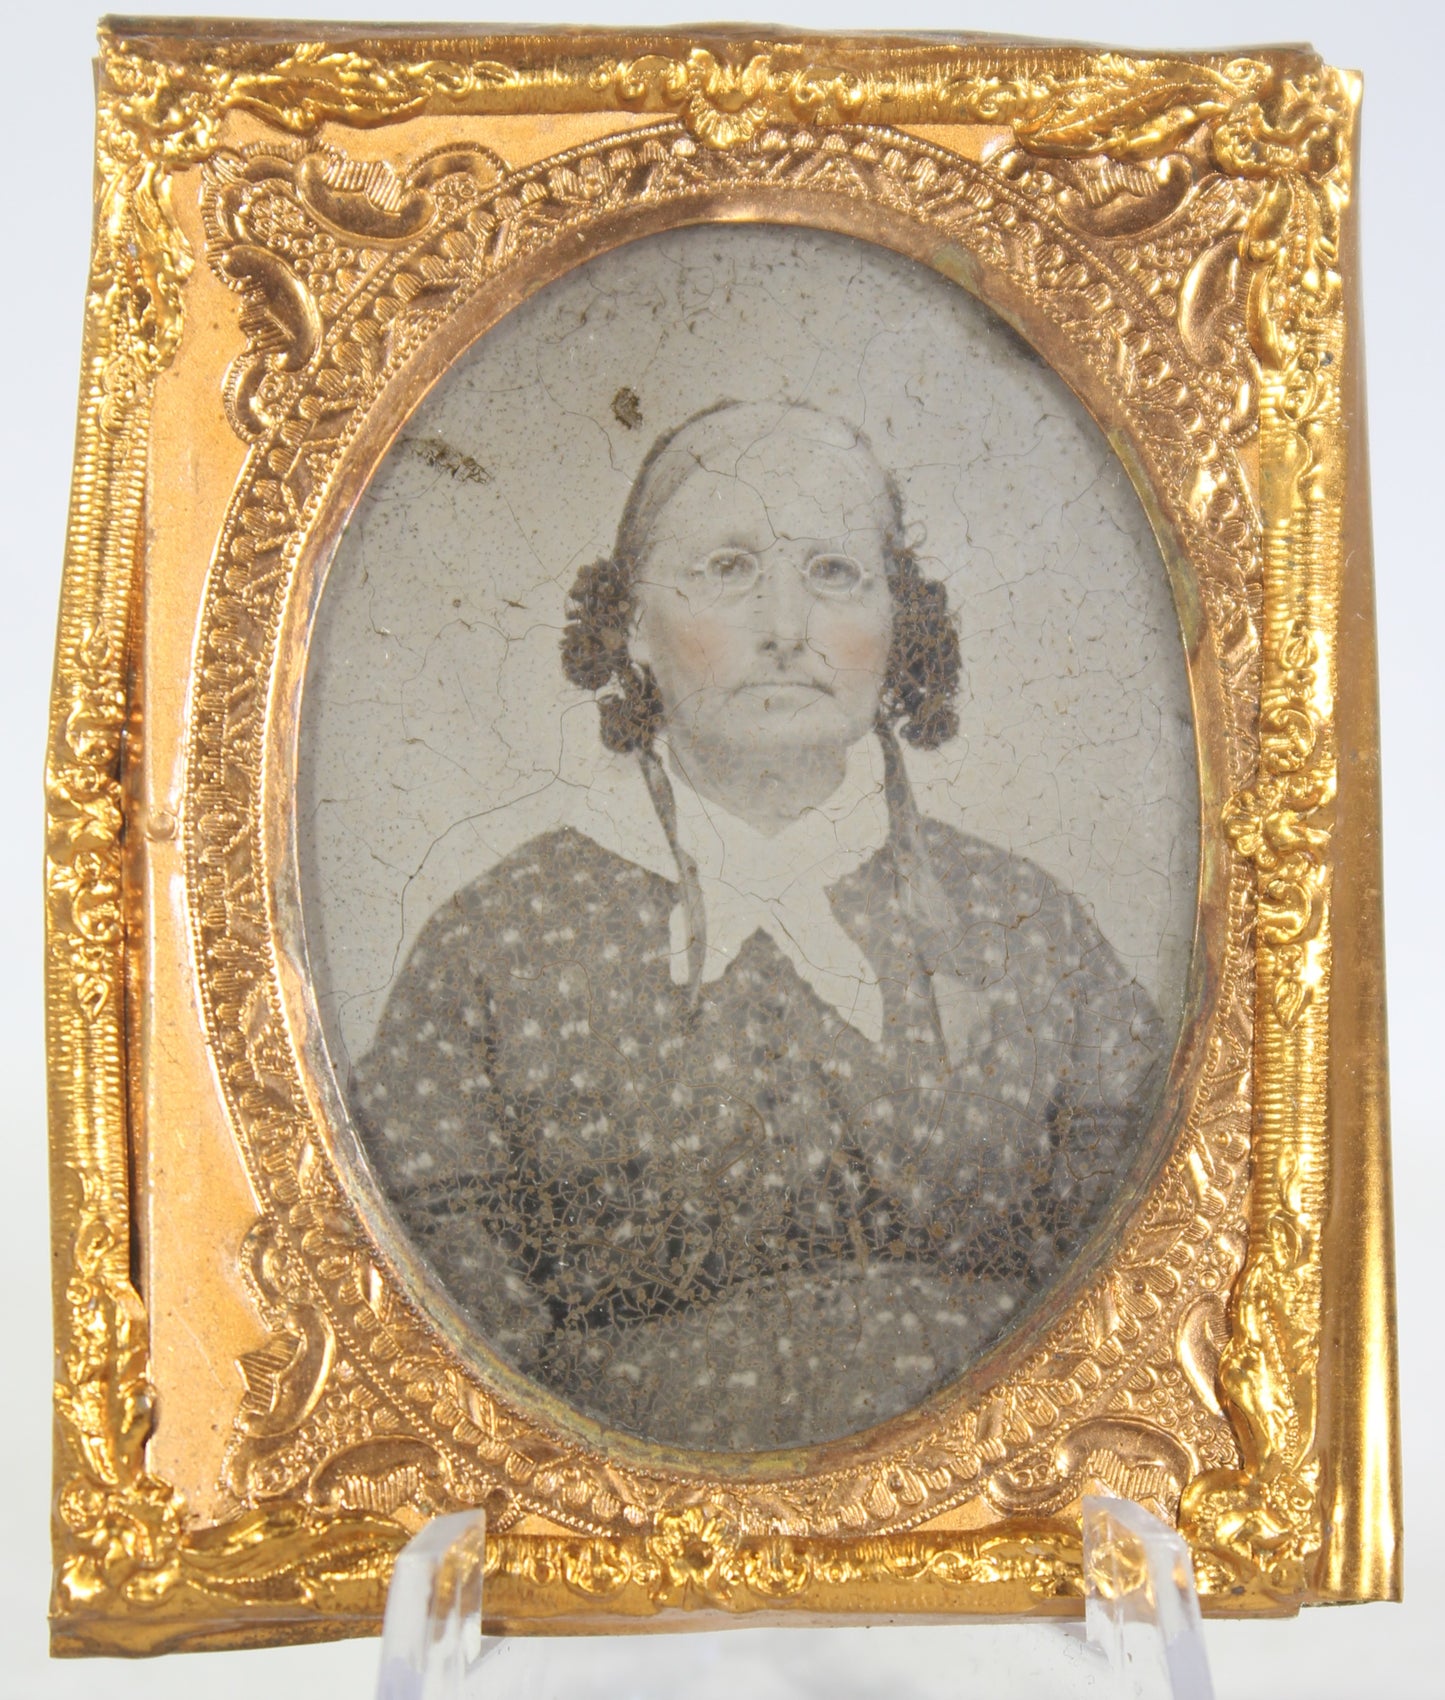 Ambrotype Photograph of an Older Woman with a Floral Bonnet